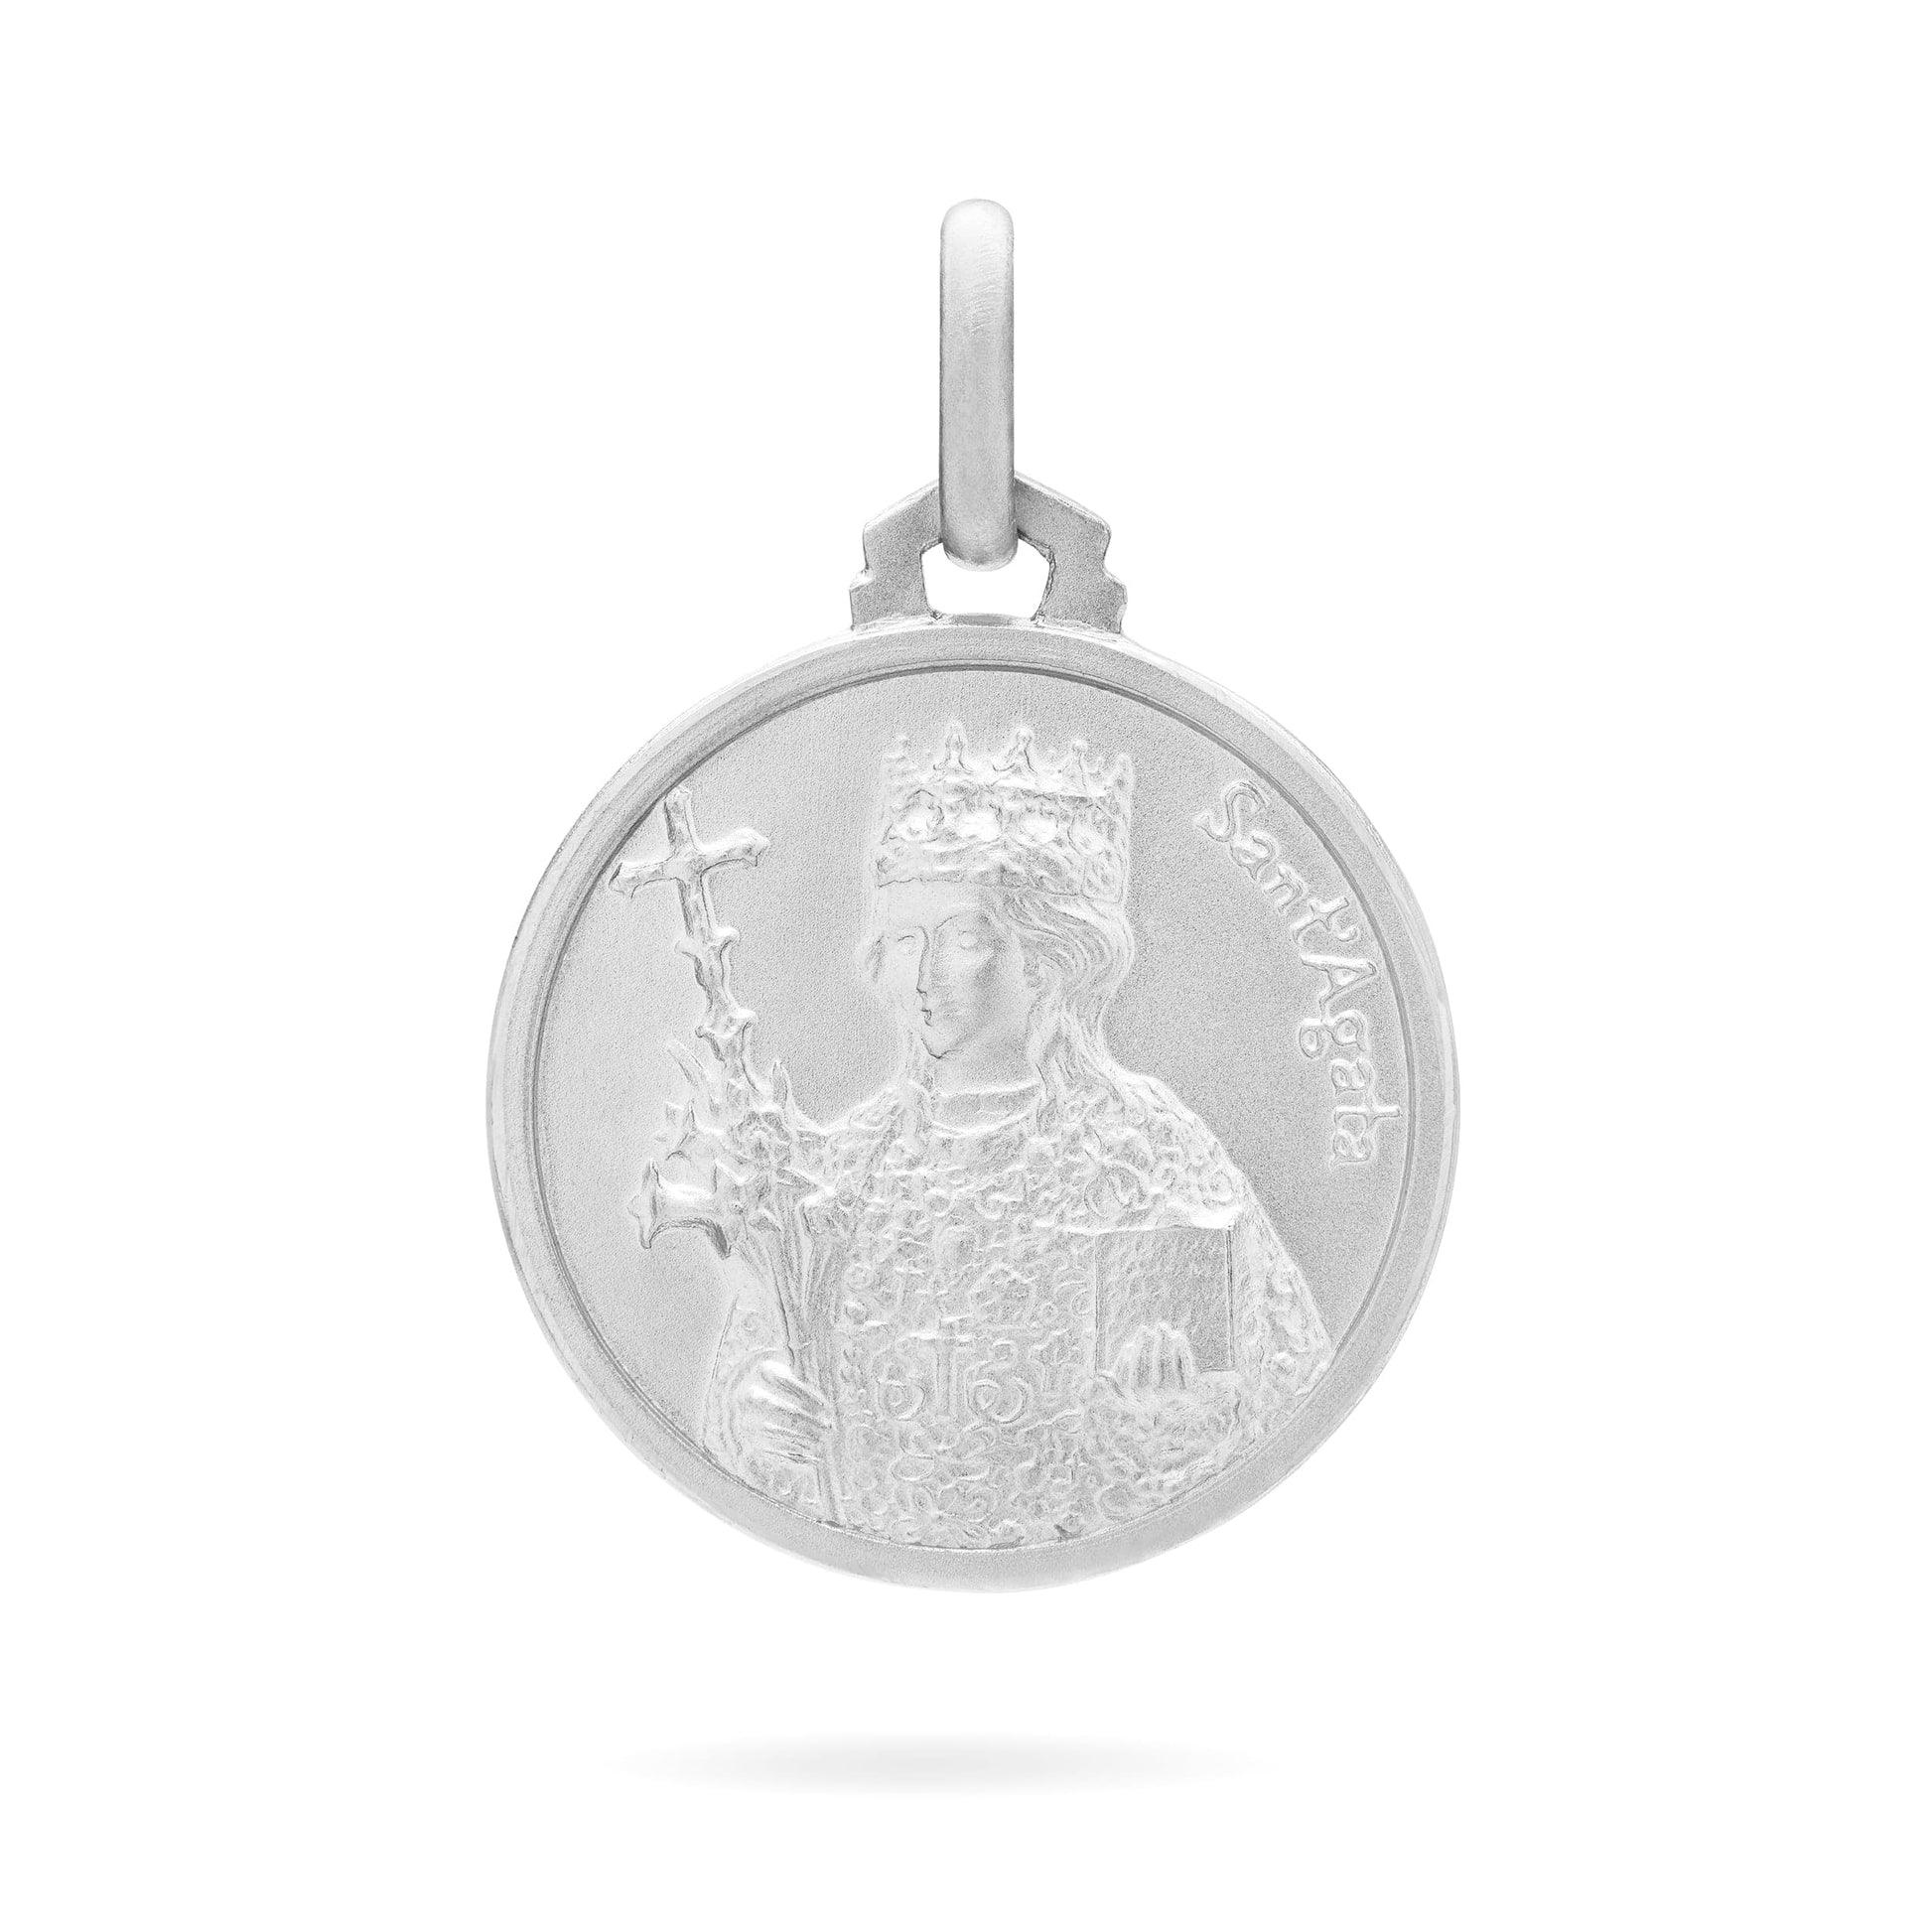 MONDO CATTOLICO Medal 15 mm (0.59 in) St. Agatha Sterling Silver Medal